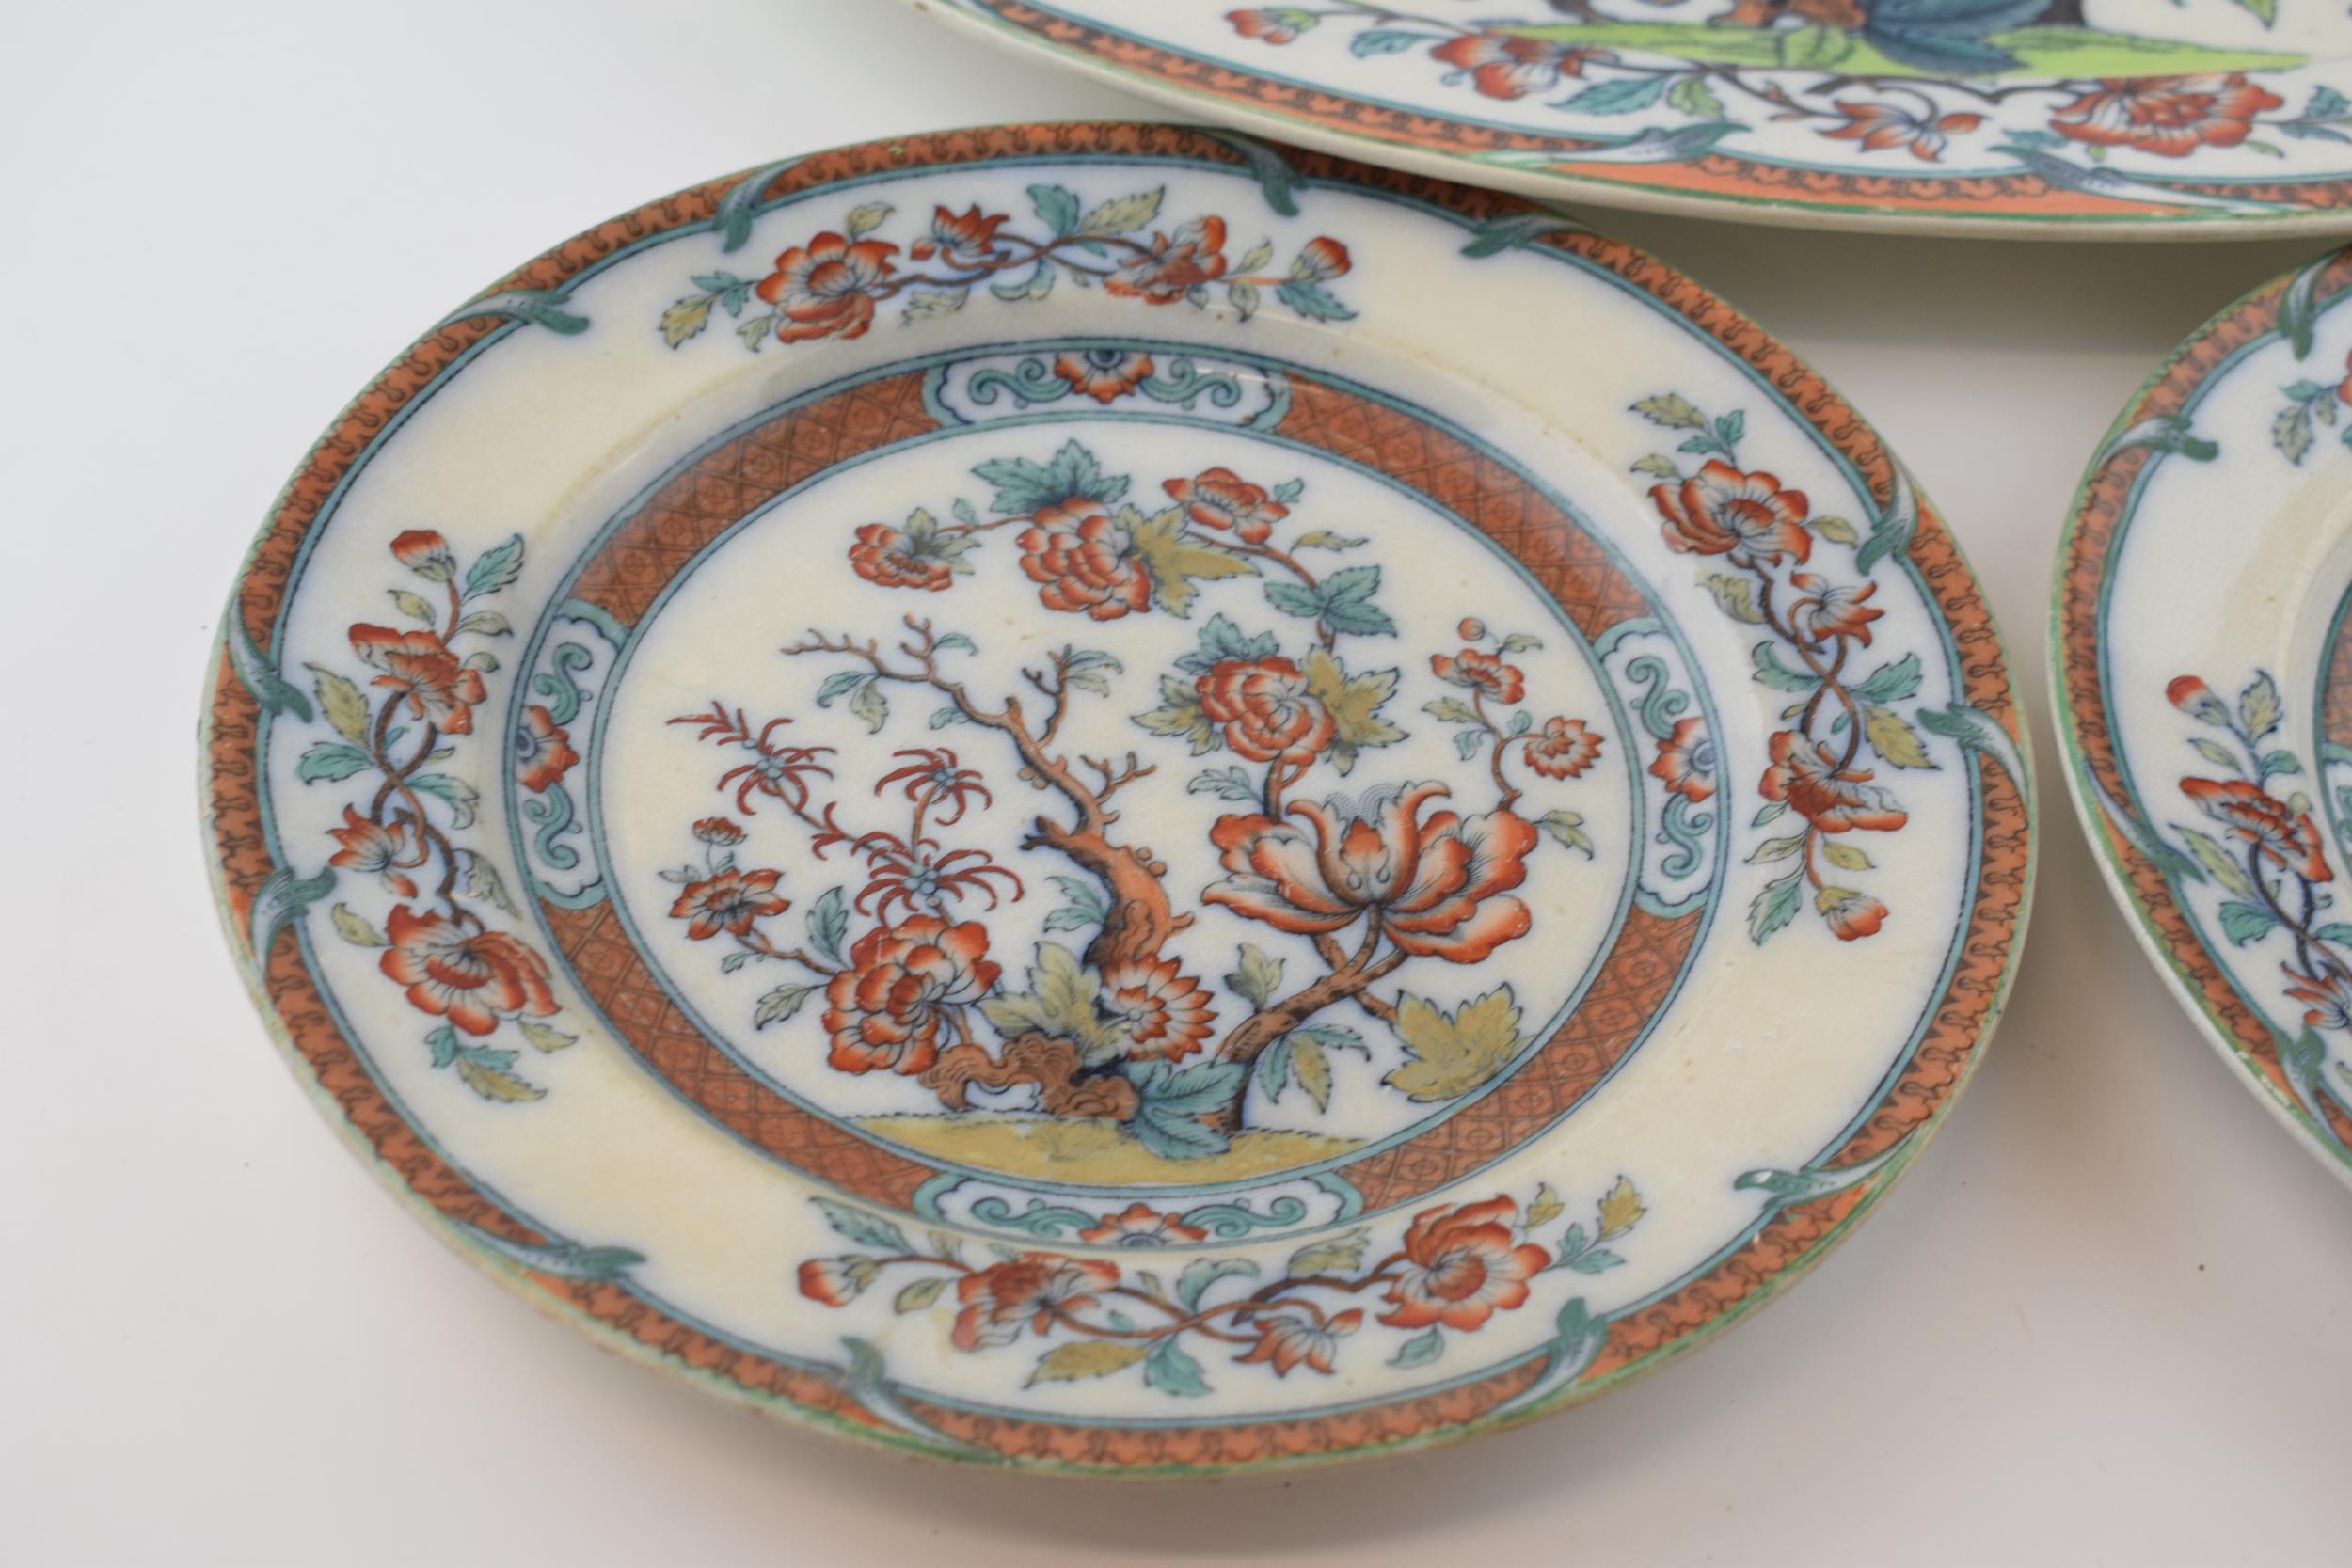 An early 19 th century transfer-printed and coloured iron stone china large floral design platter, - Image 3 of 5